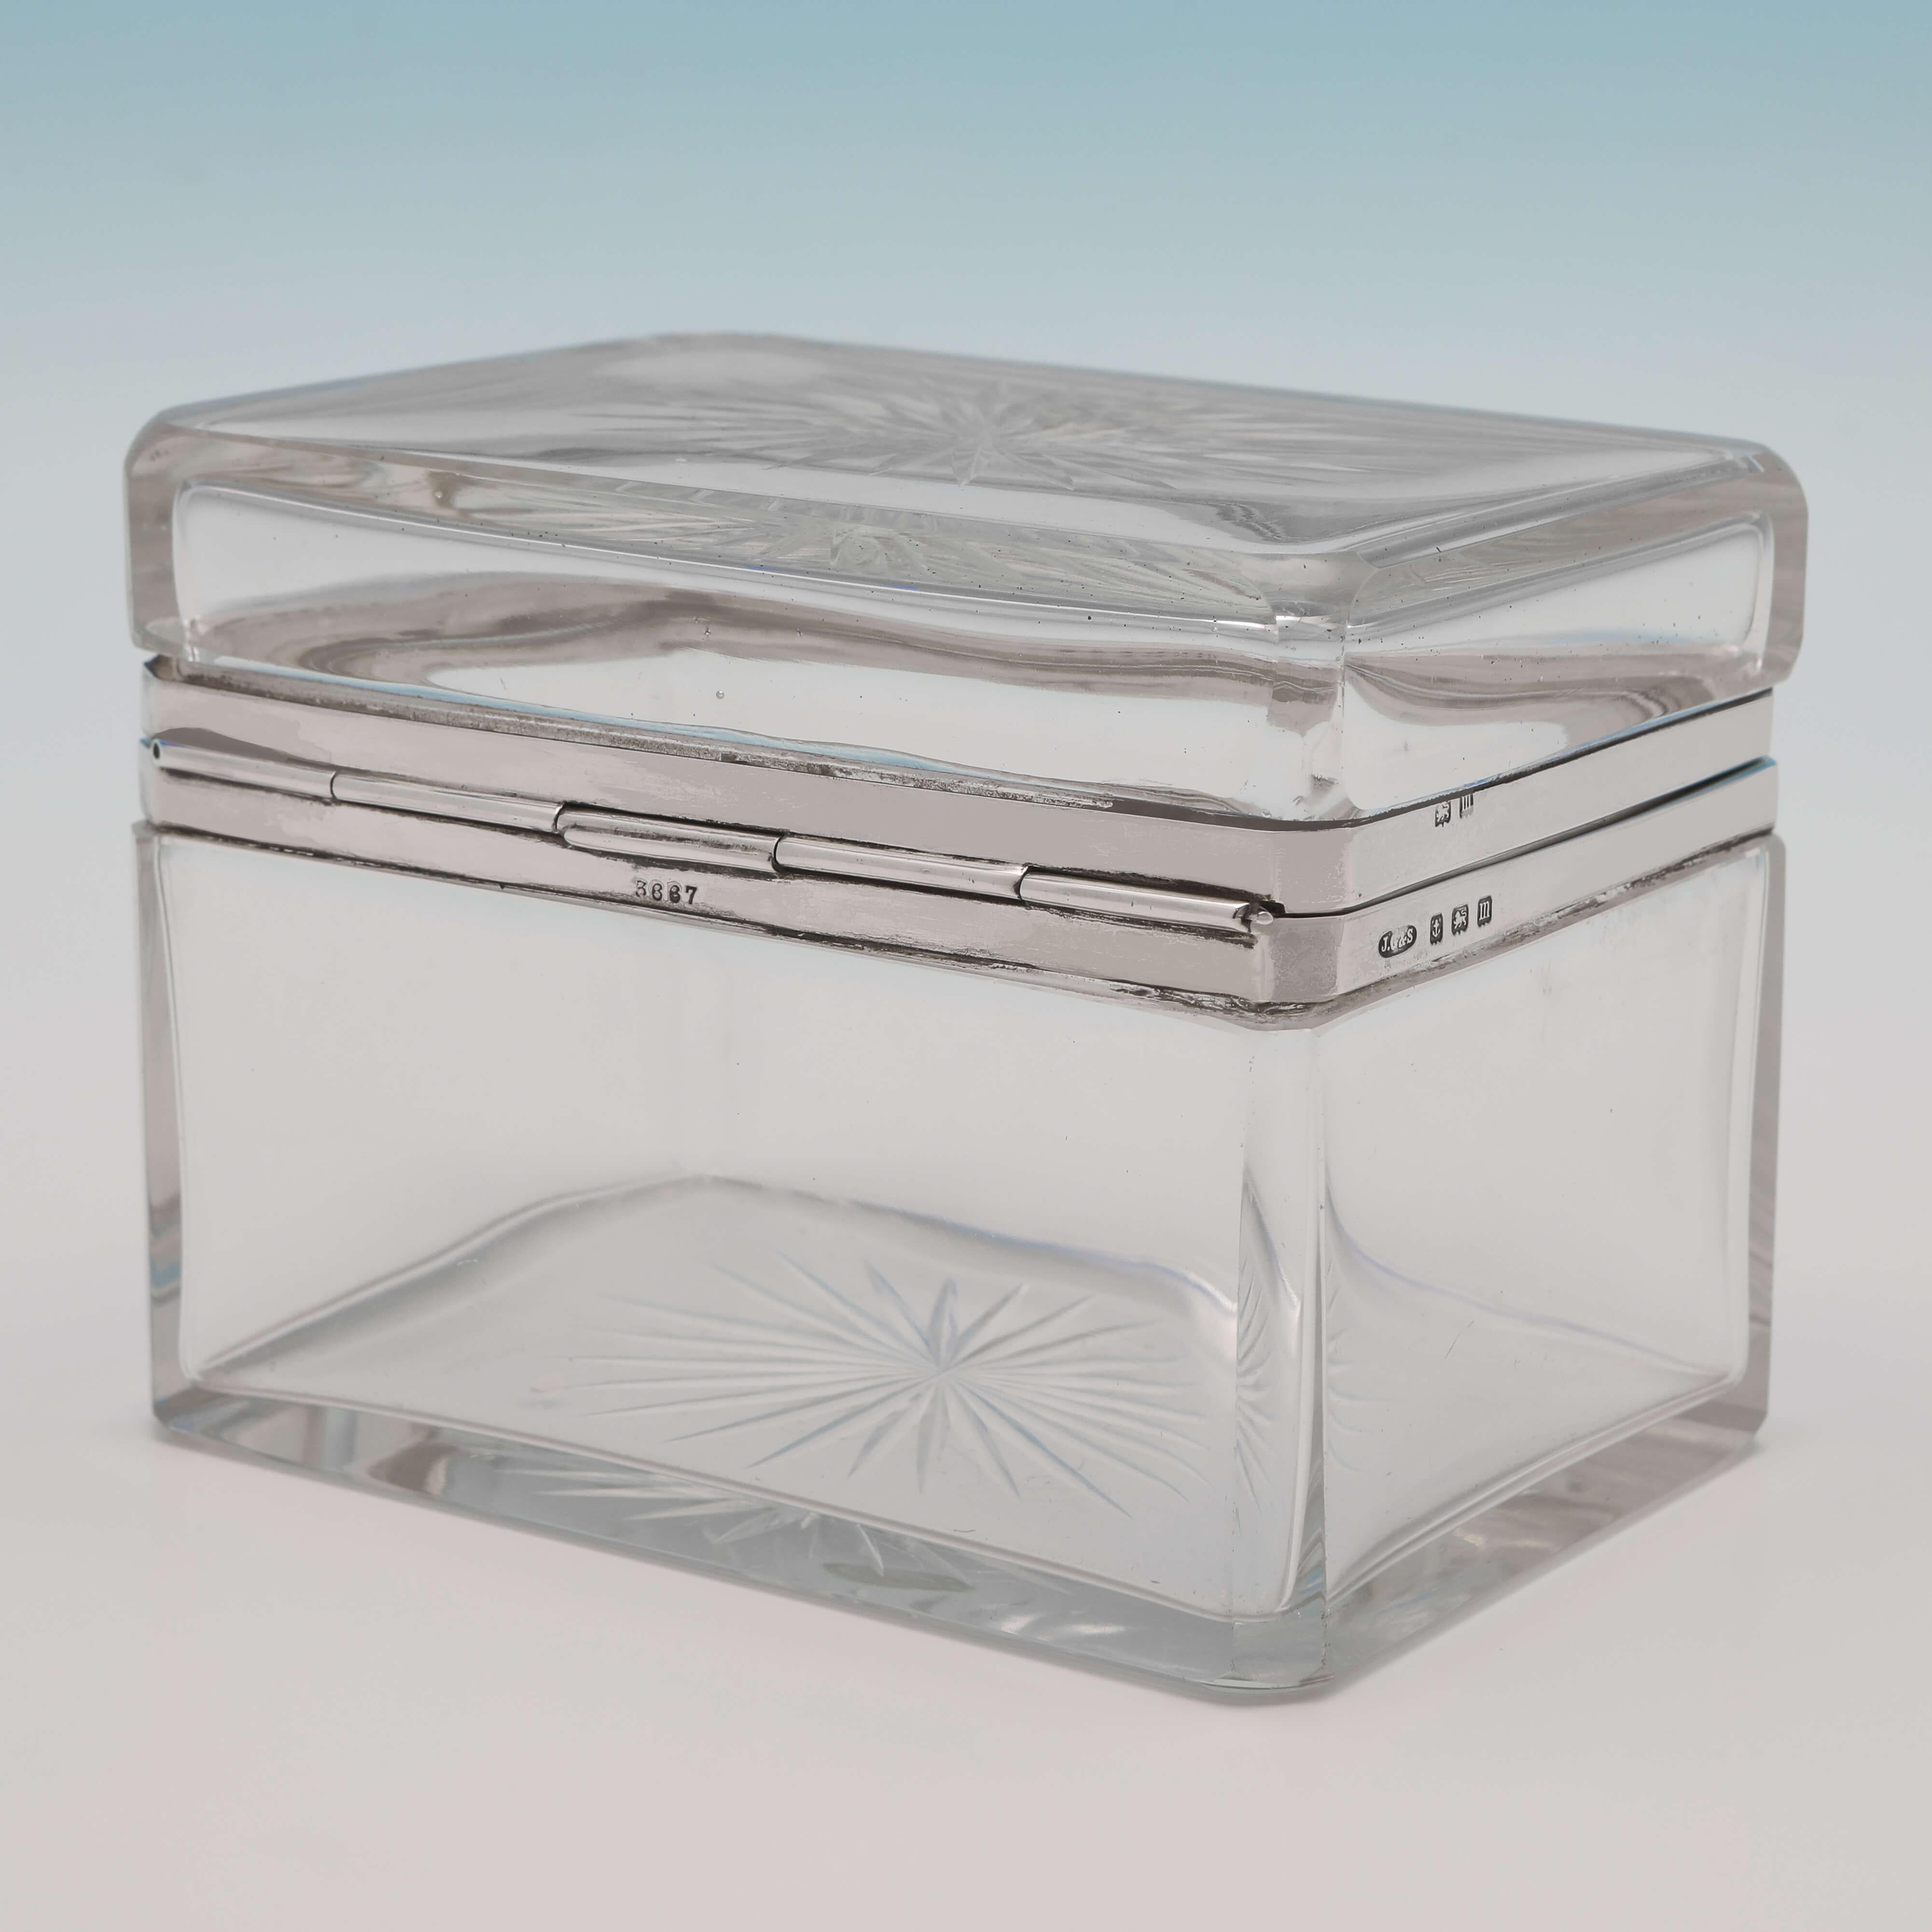 Hallmarked in Birmingham in 1911 by John Grinsell & Sons this handsome Antique, sterling silver and glass box is very stylish in design. 
The box is very usable, and would be equally at home on a bar or on a dressing table. 

The box measures